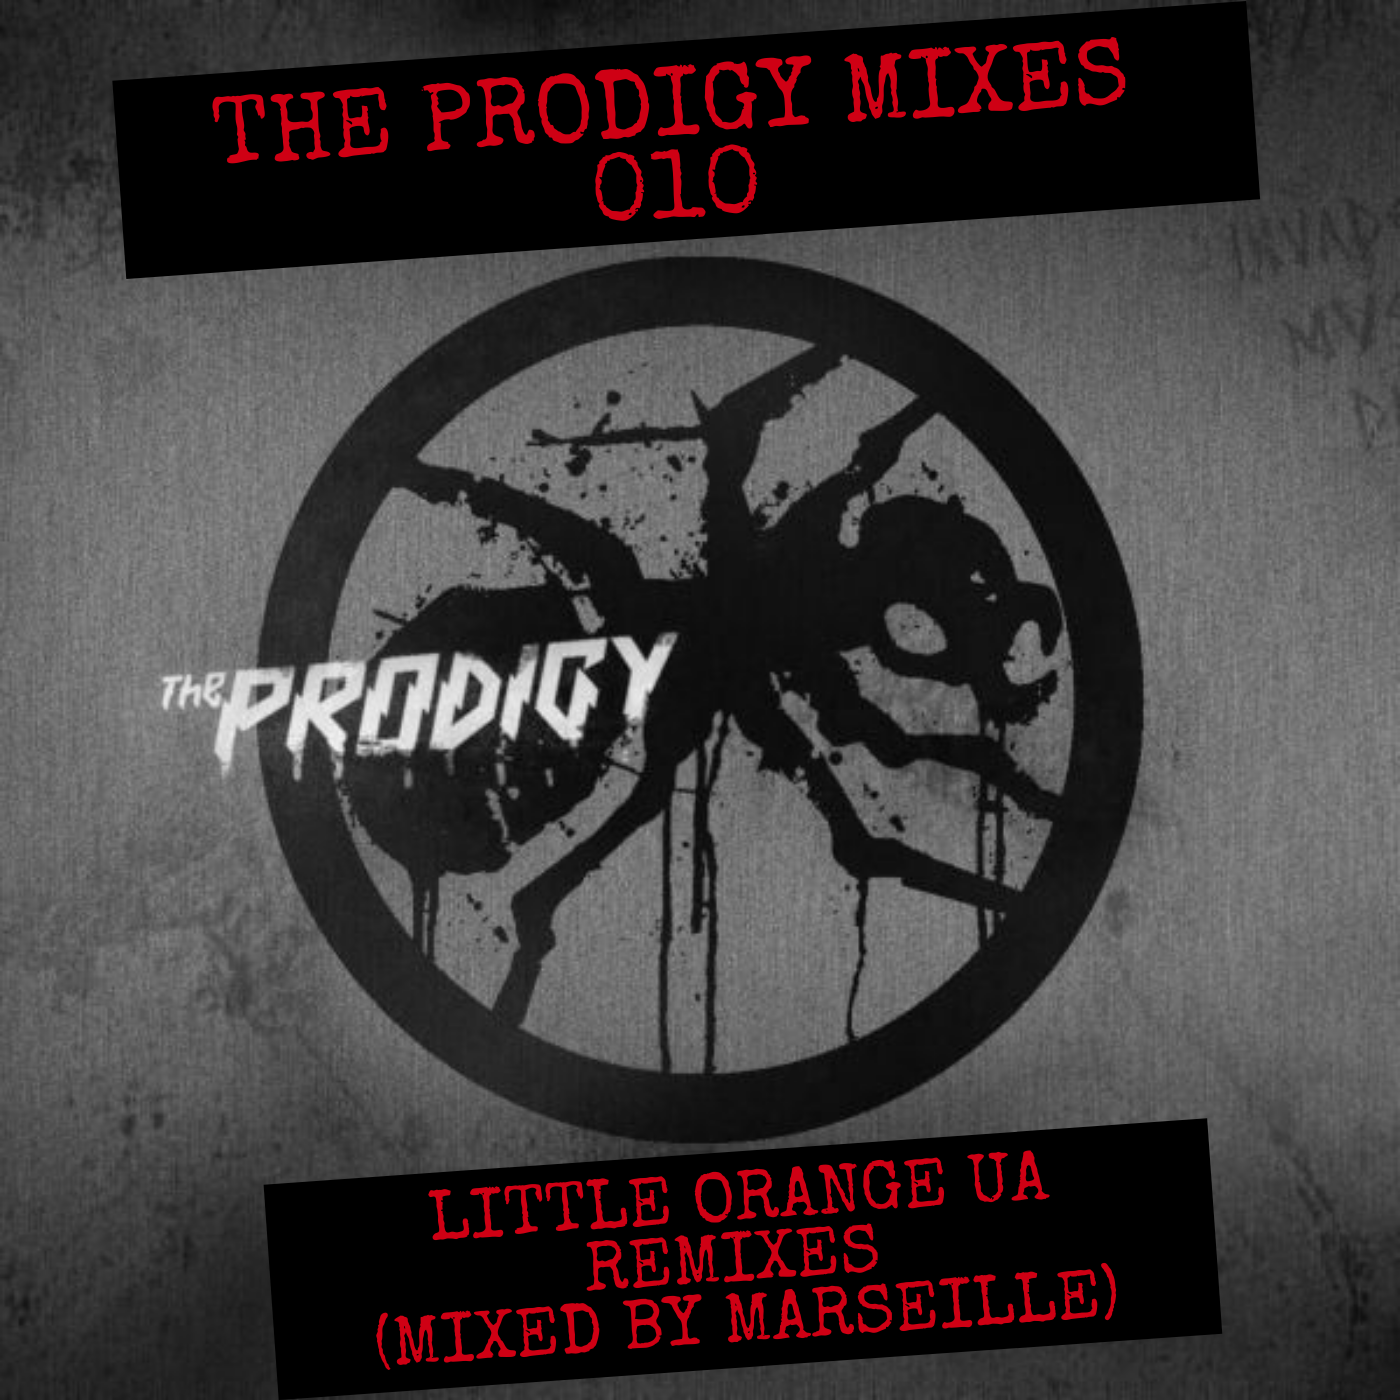 Prodigy their. Extended Mix Prodigy. The Prodigy Mix. The Prodigy логотип группы. The Prodigy for Mixes.